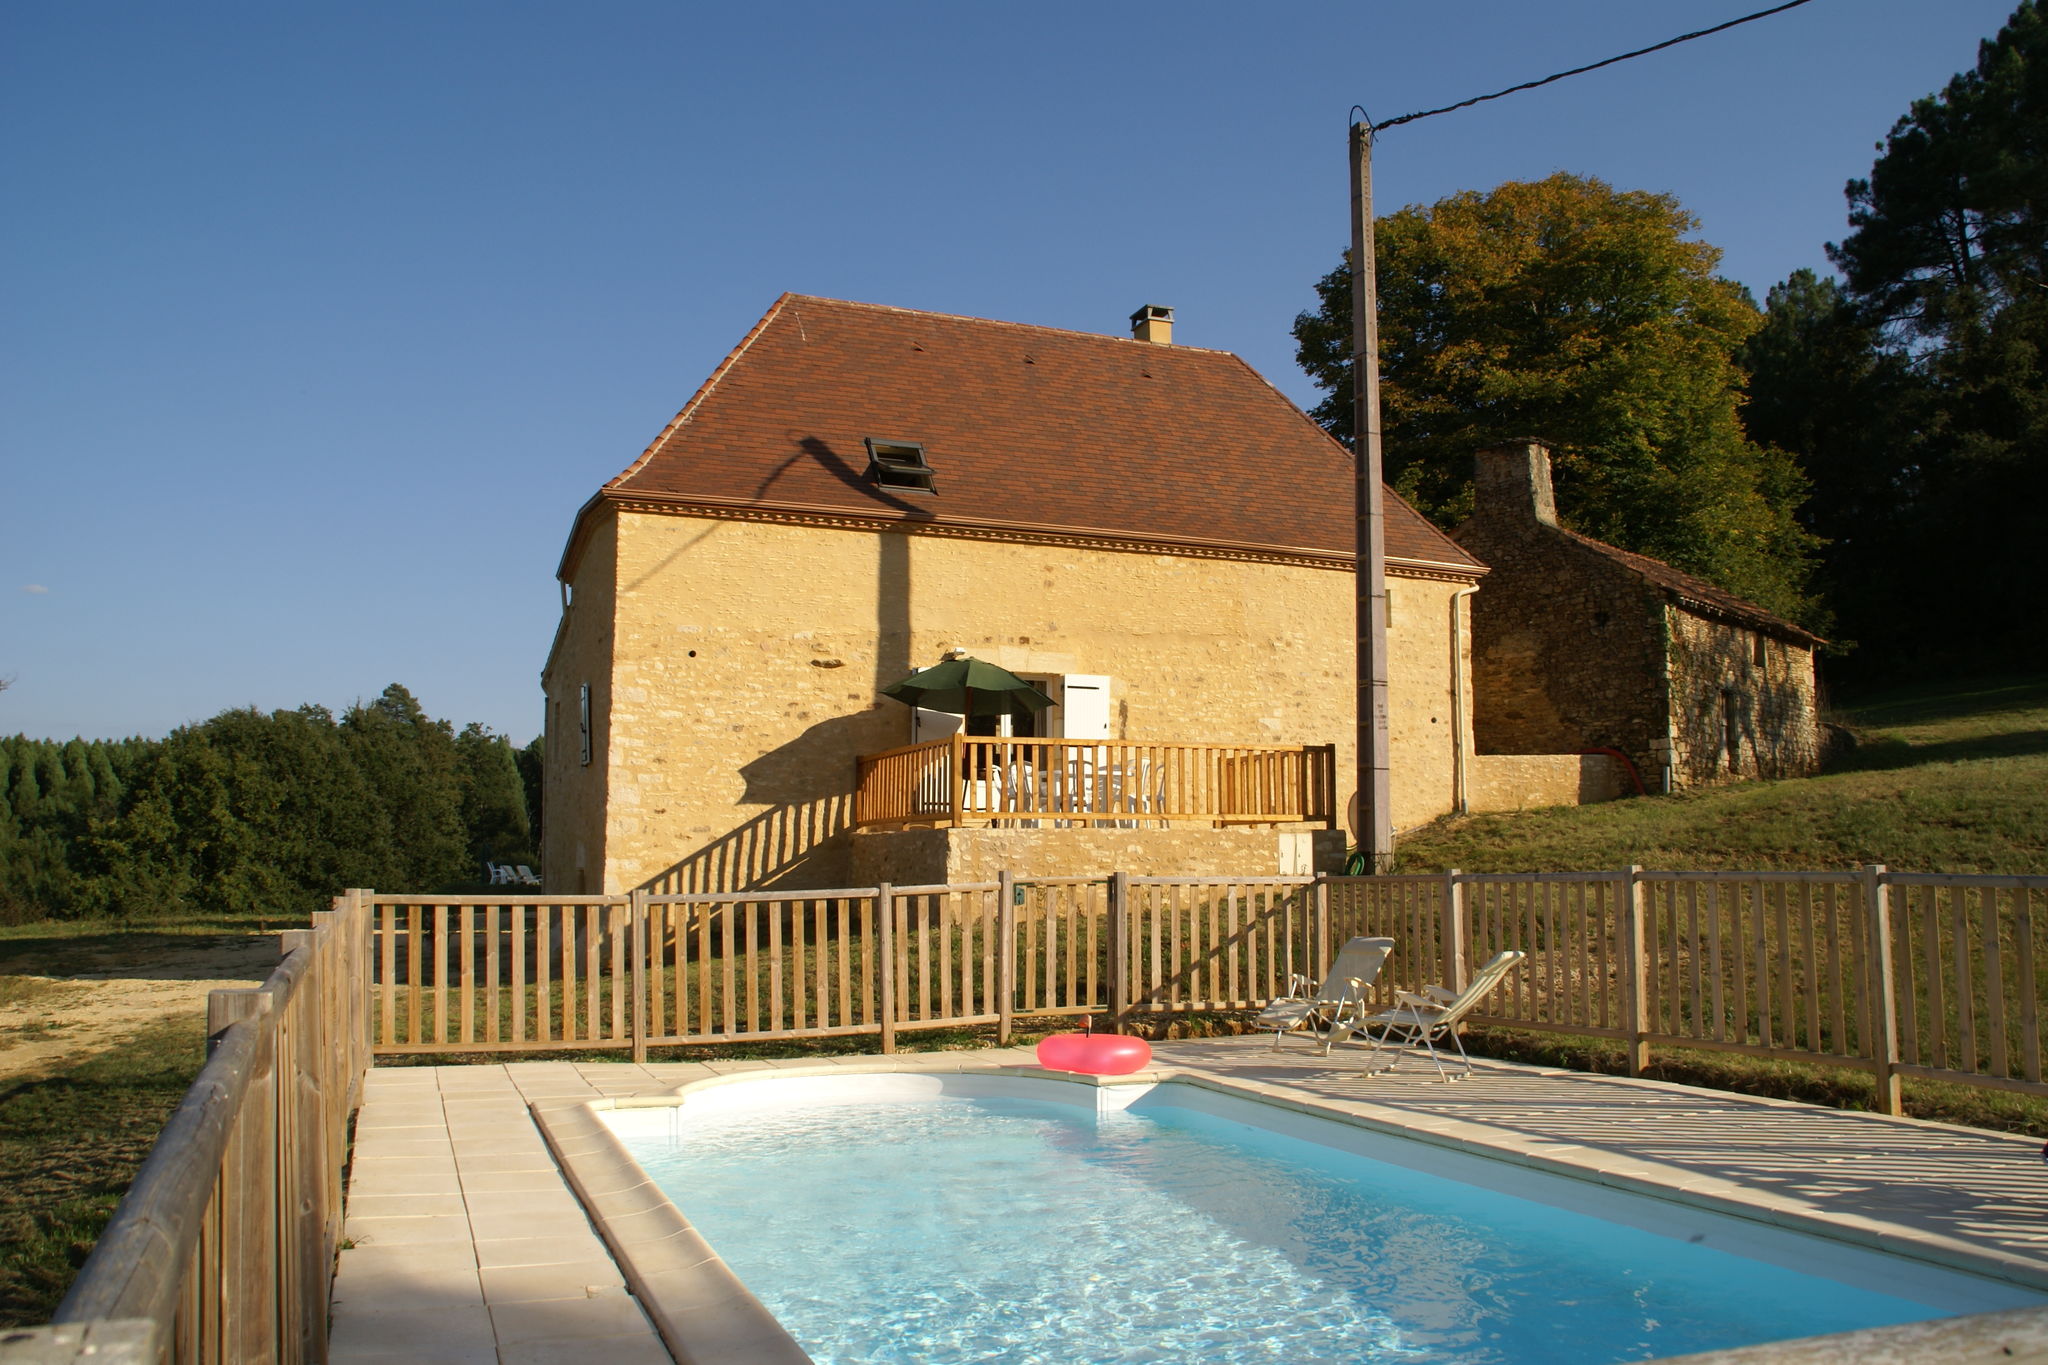 Authentic home with private swimming pool in beautiful and quiet surroundings.